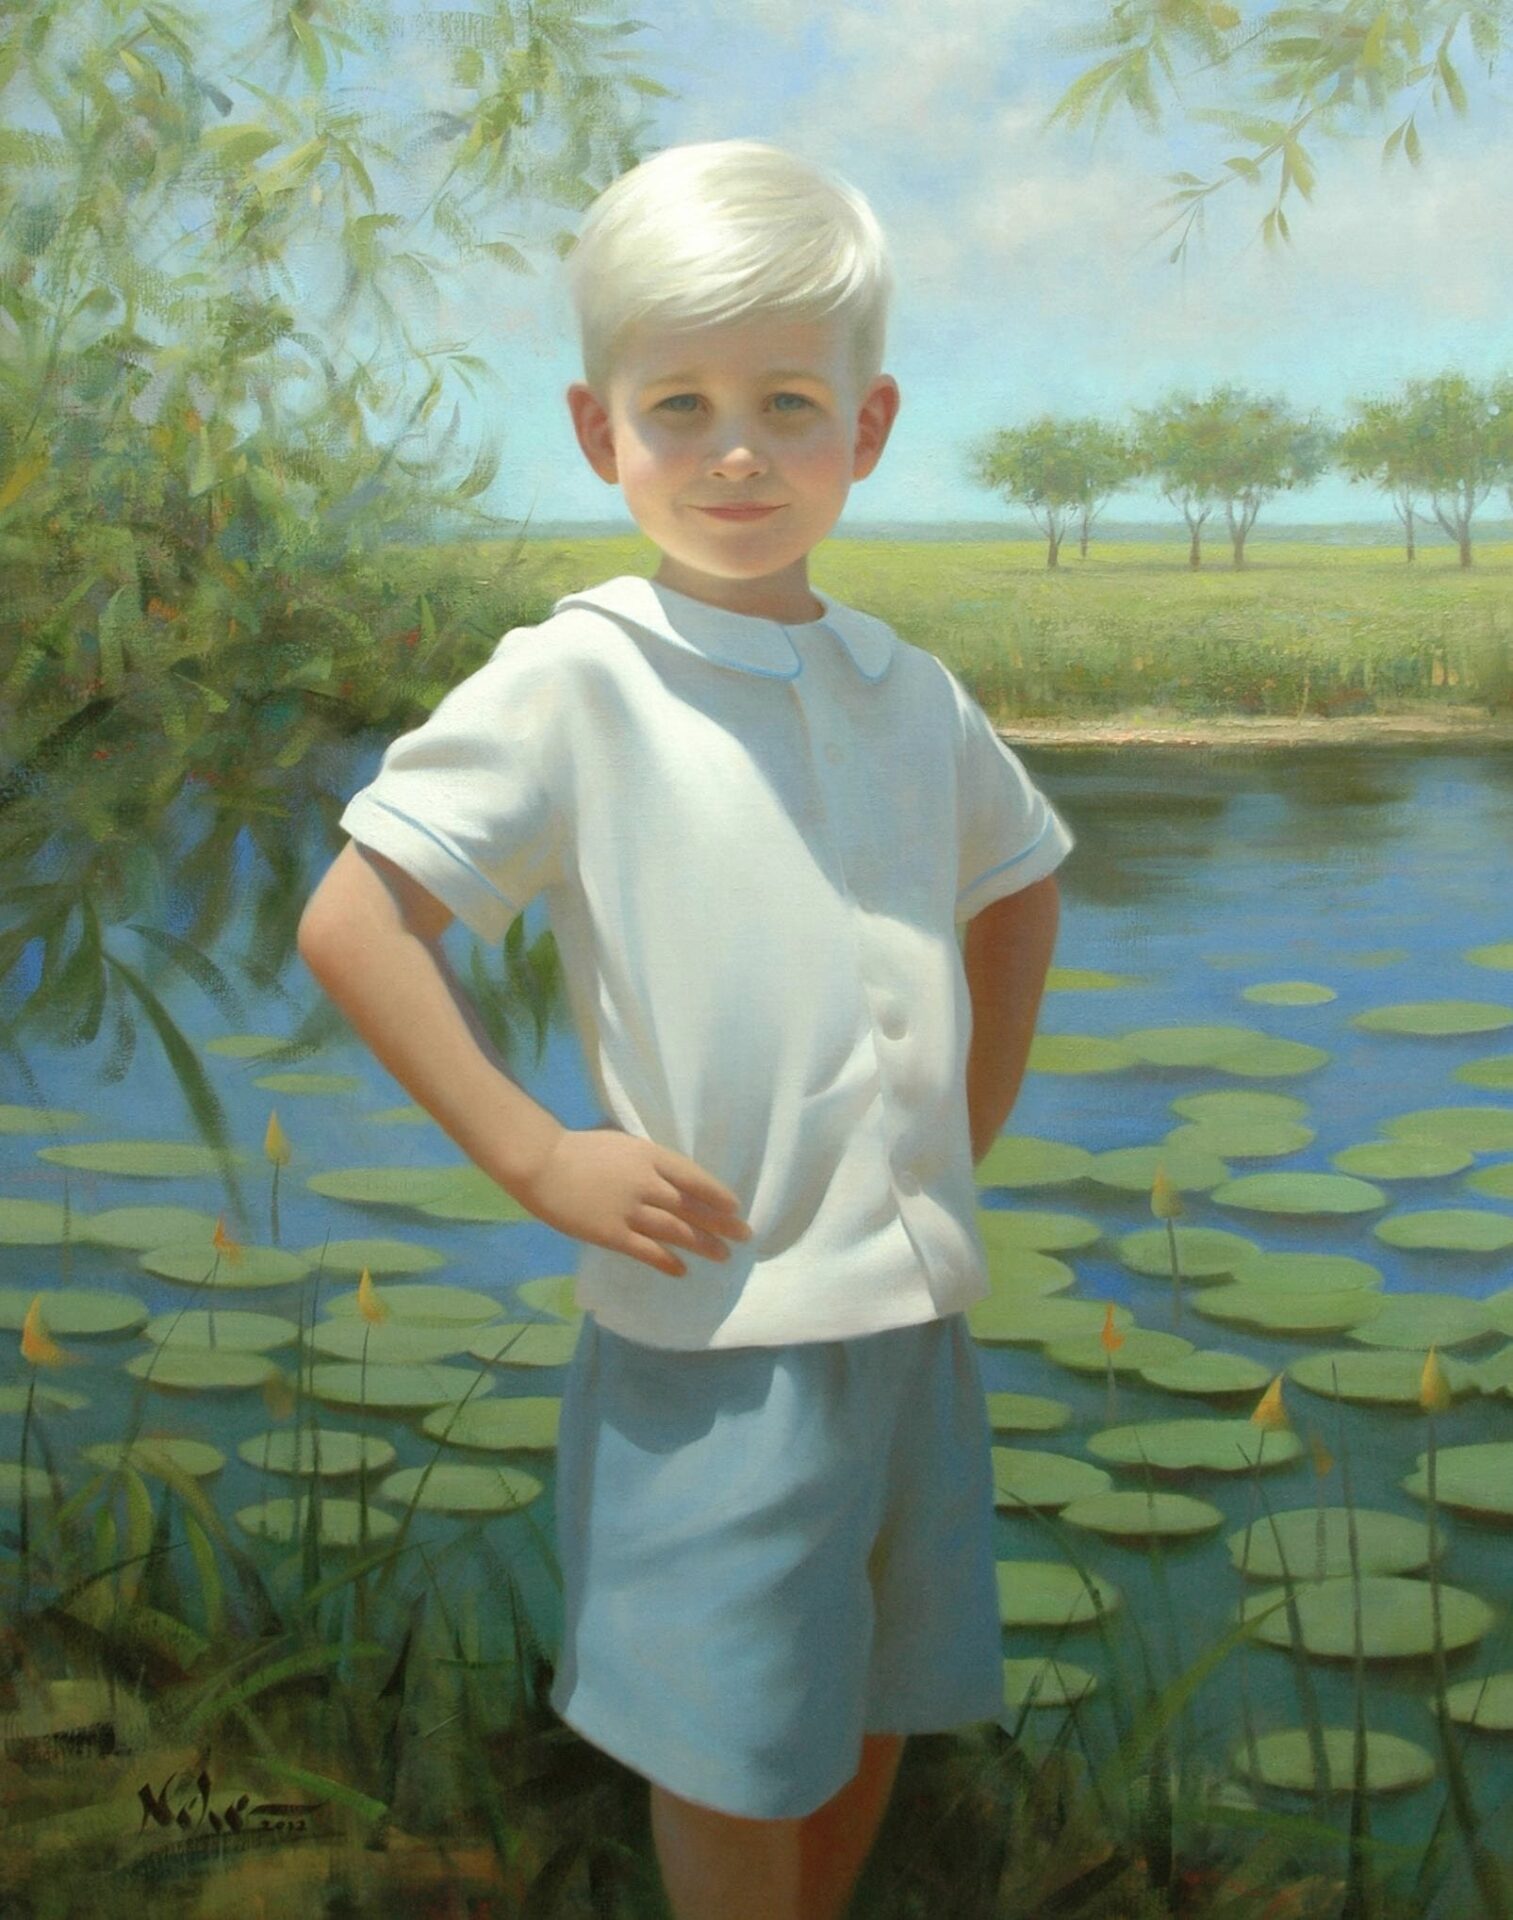 Portrait painting of a confident young boy